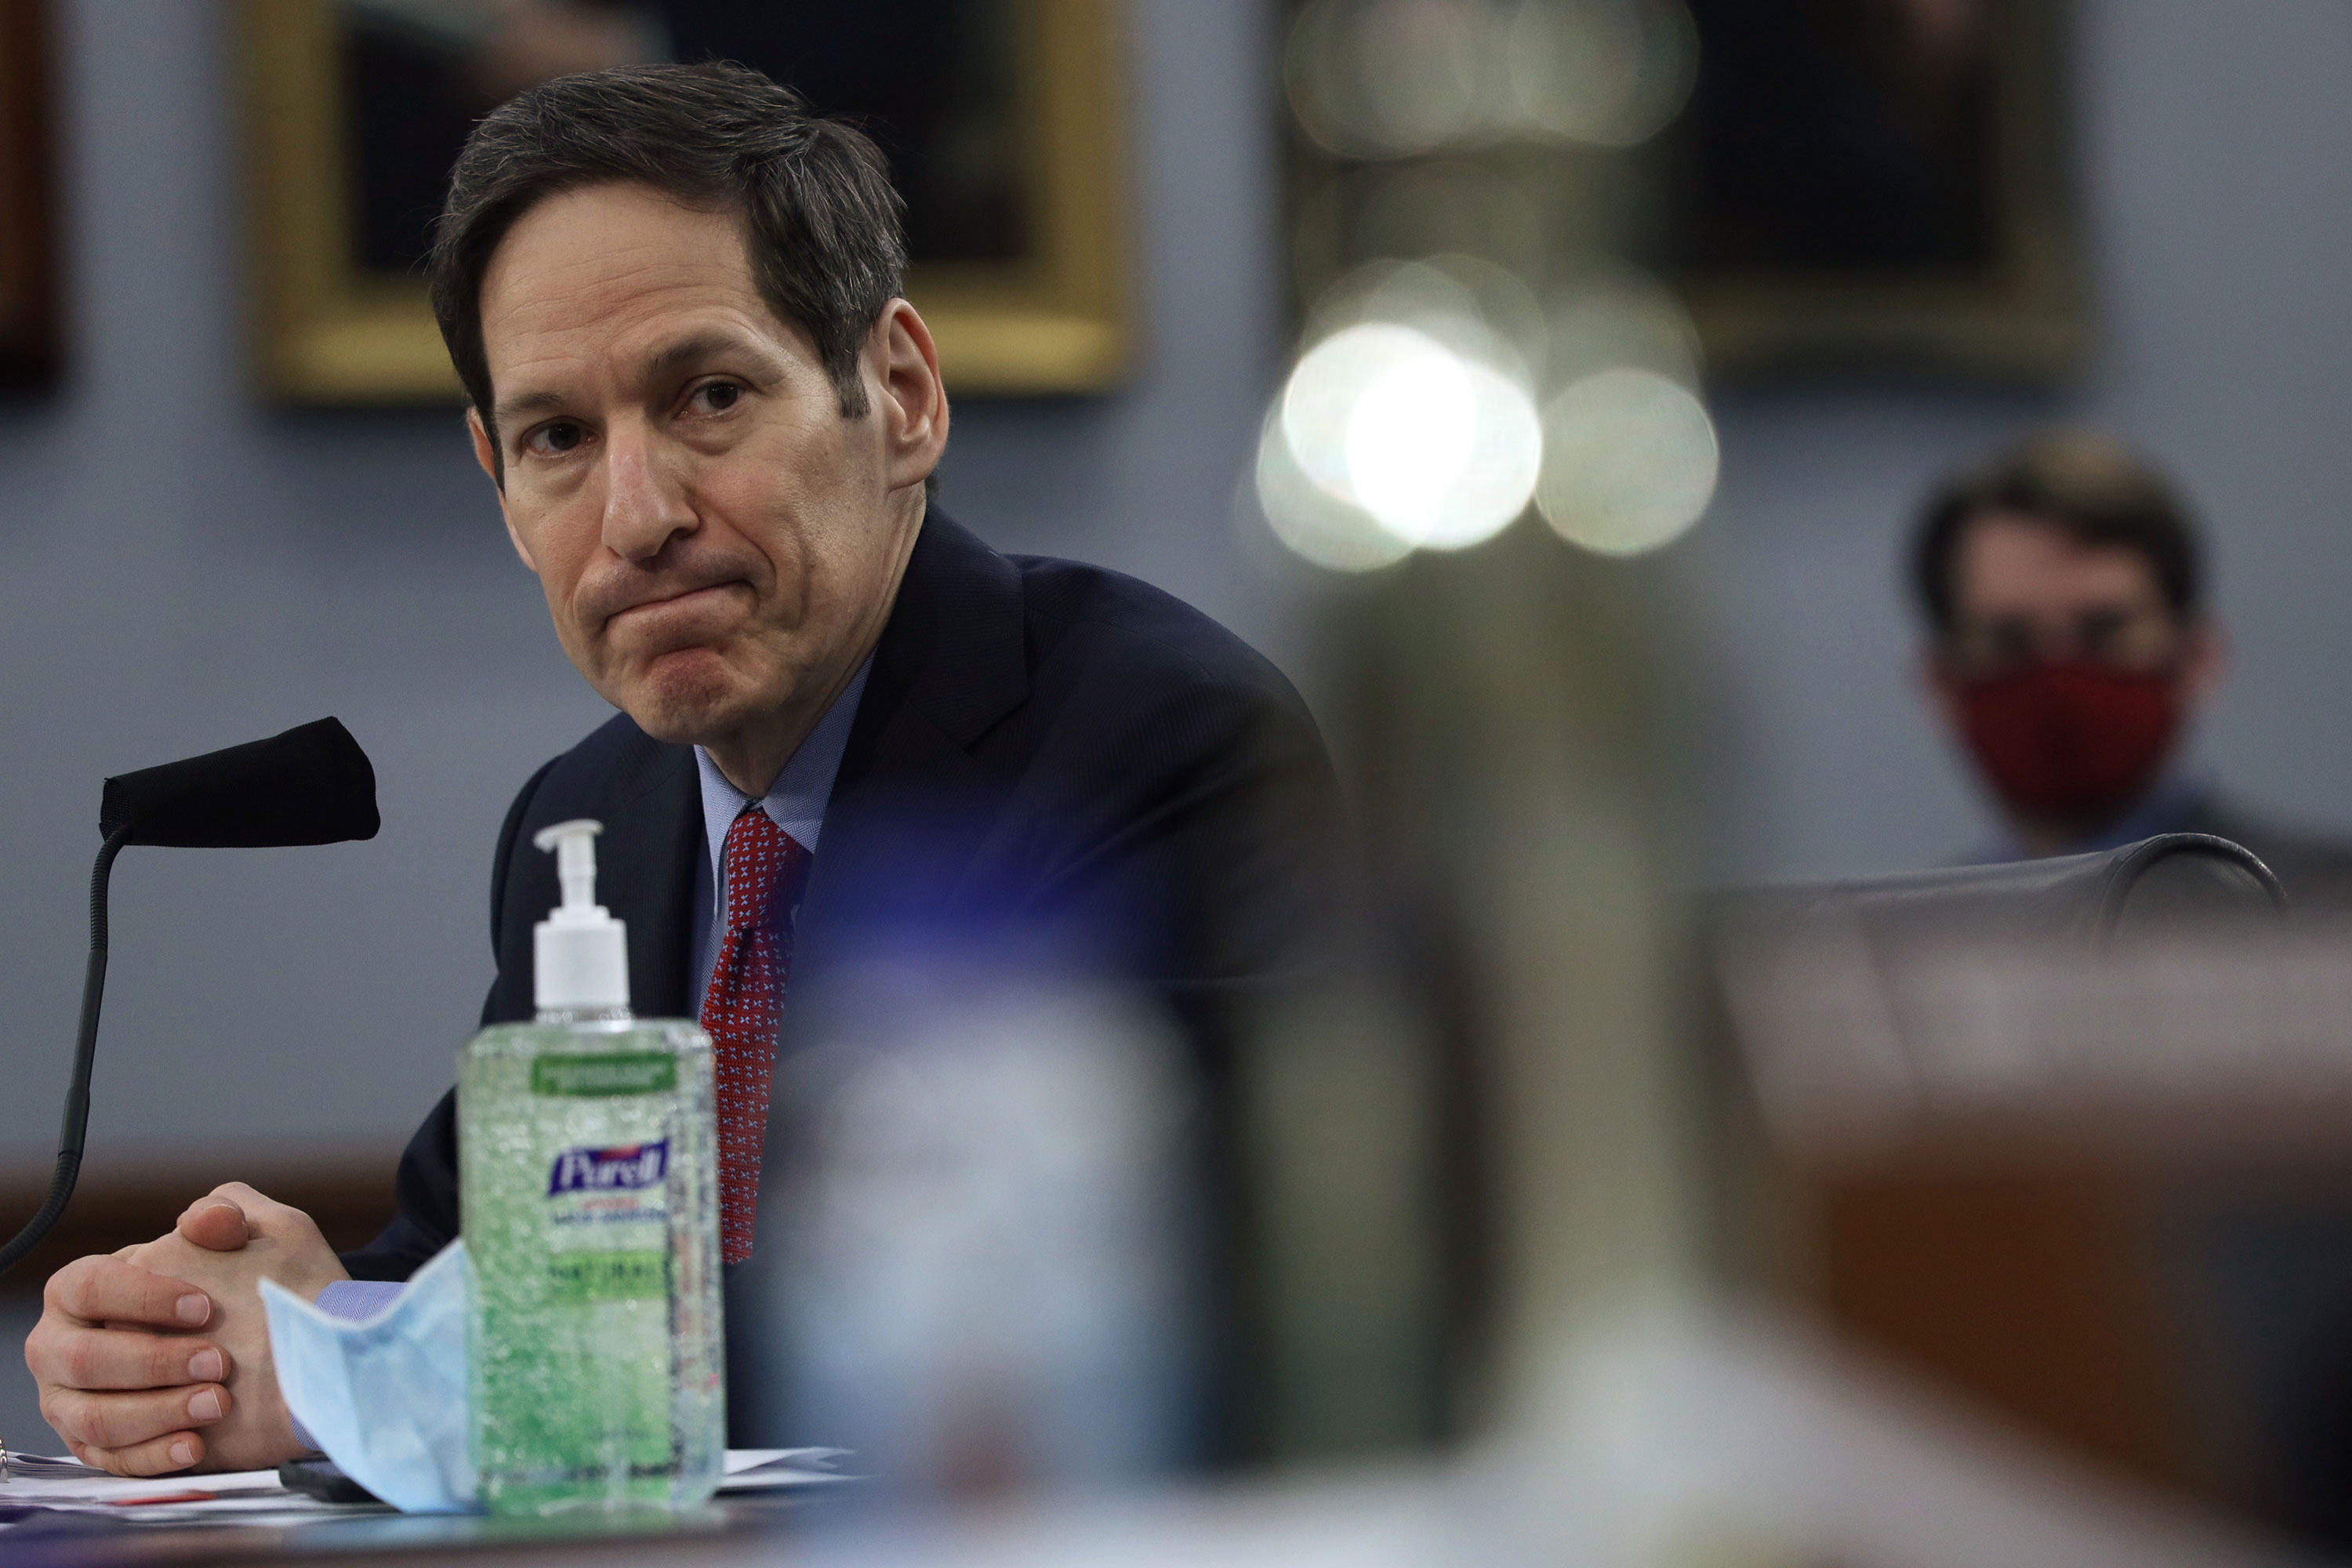 Former Director of the Centers for Disease Control and Prevention Dr. Tom Frieden at a hearing on May 6.